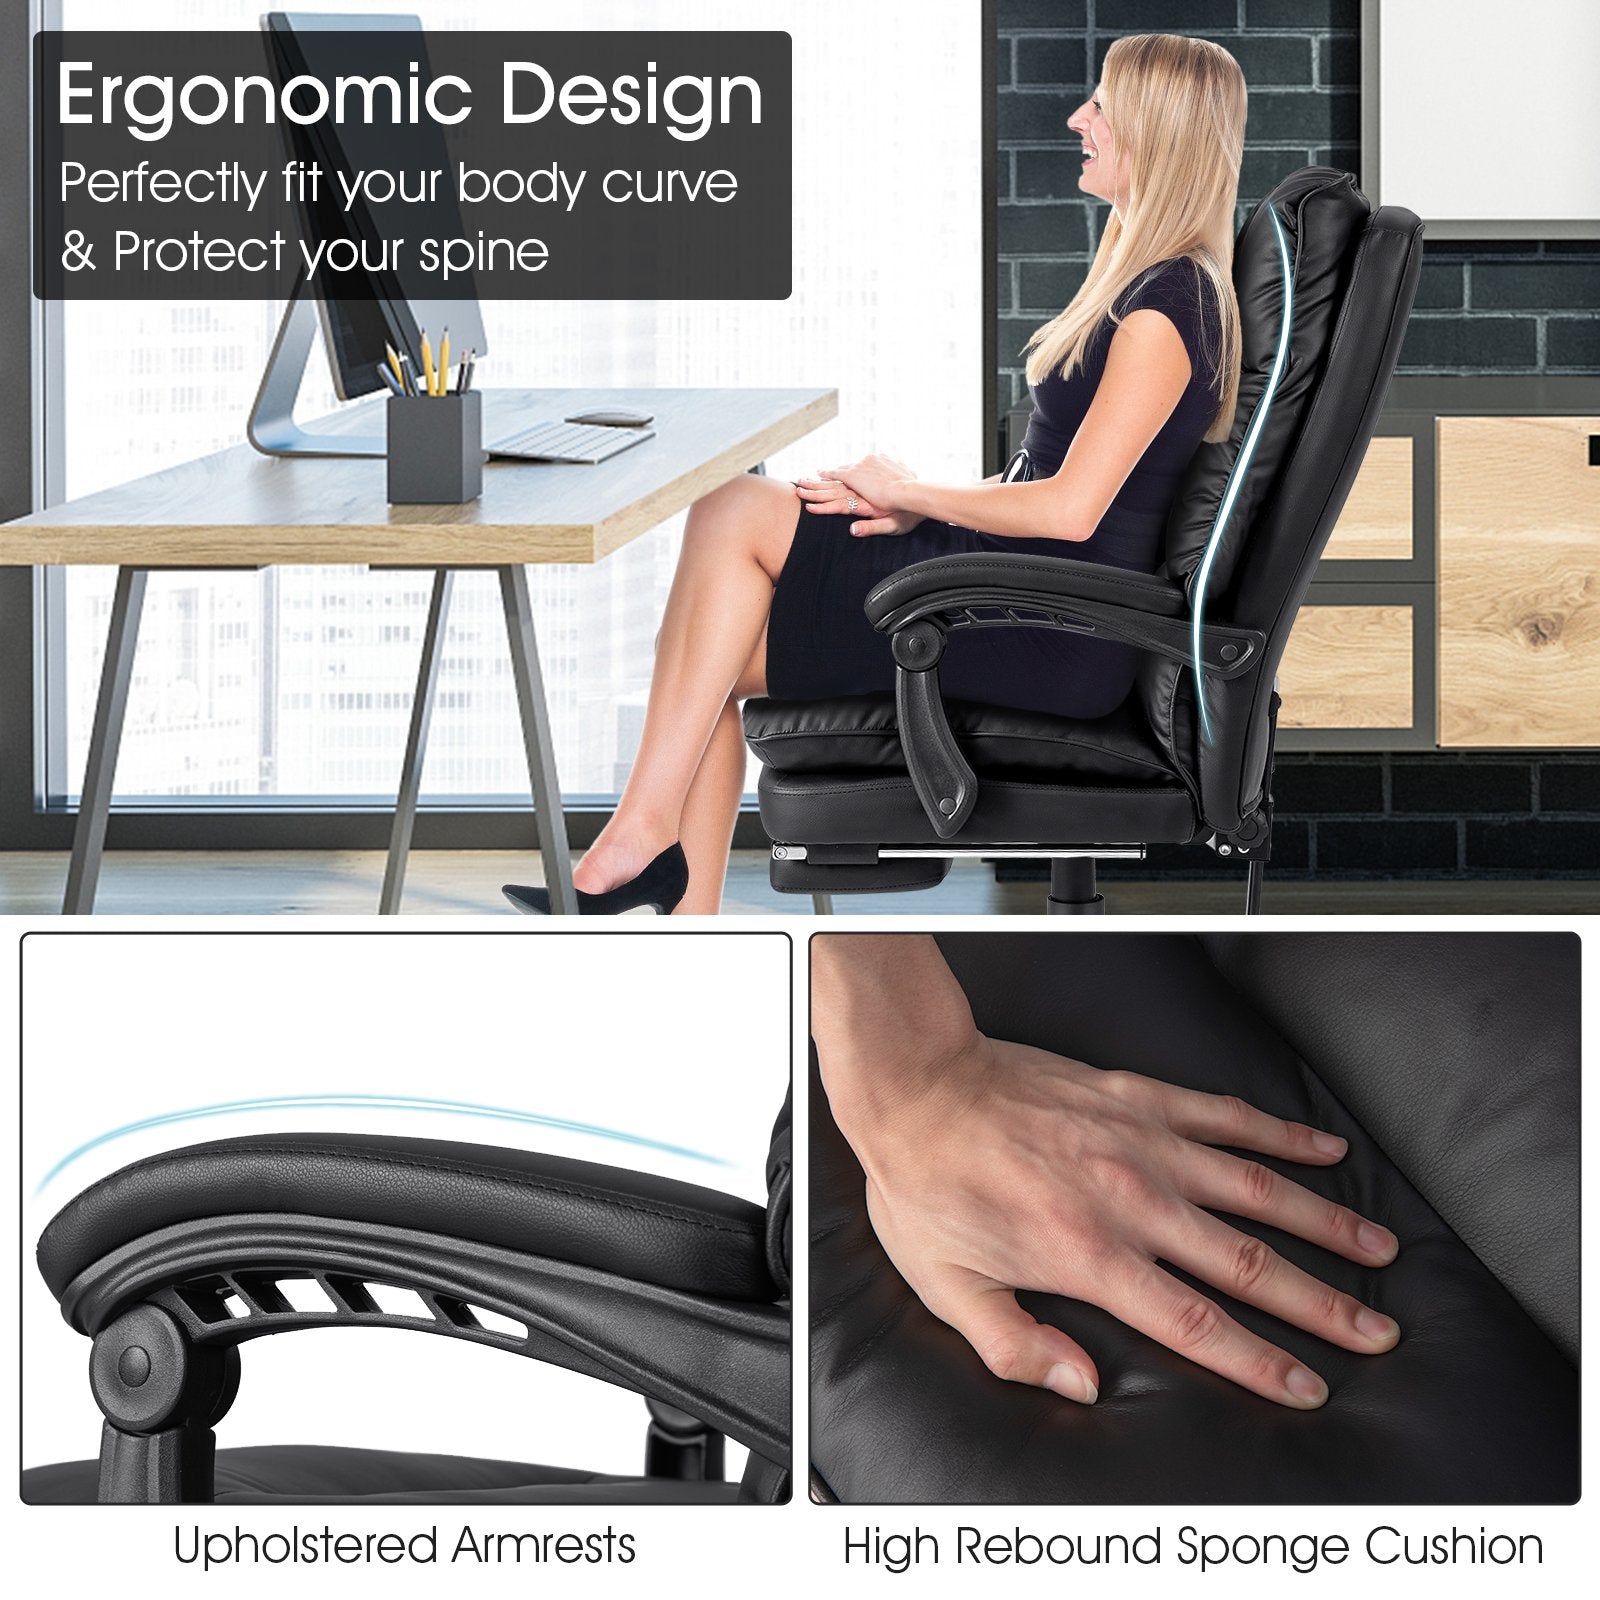 Ergonomic Adjustable Swivel Office Chair with Retractable Footrest, Black at Gallery Canada